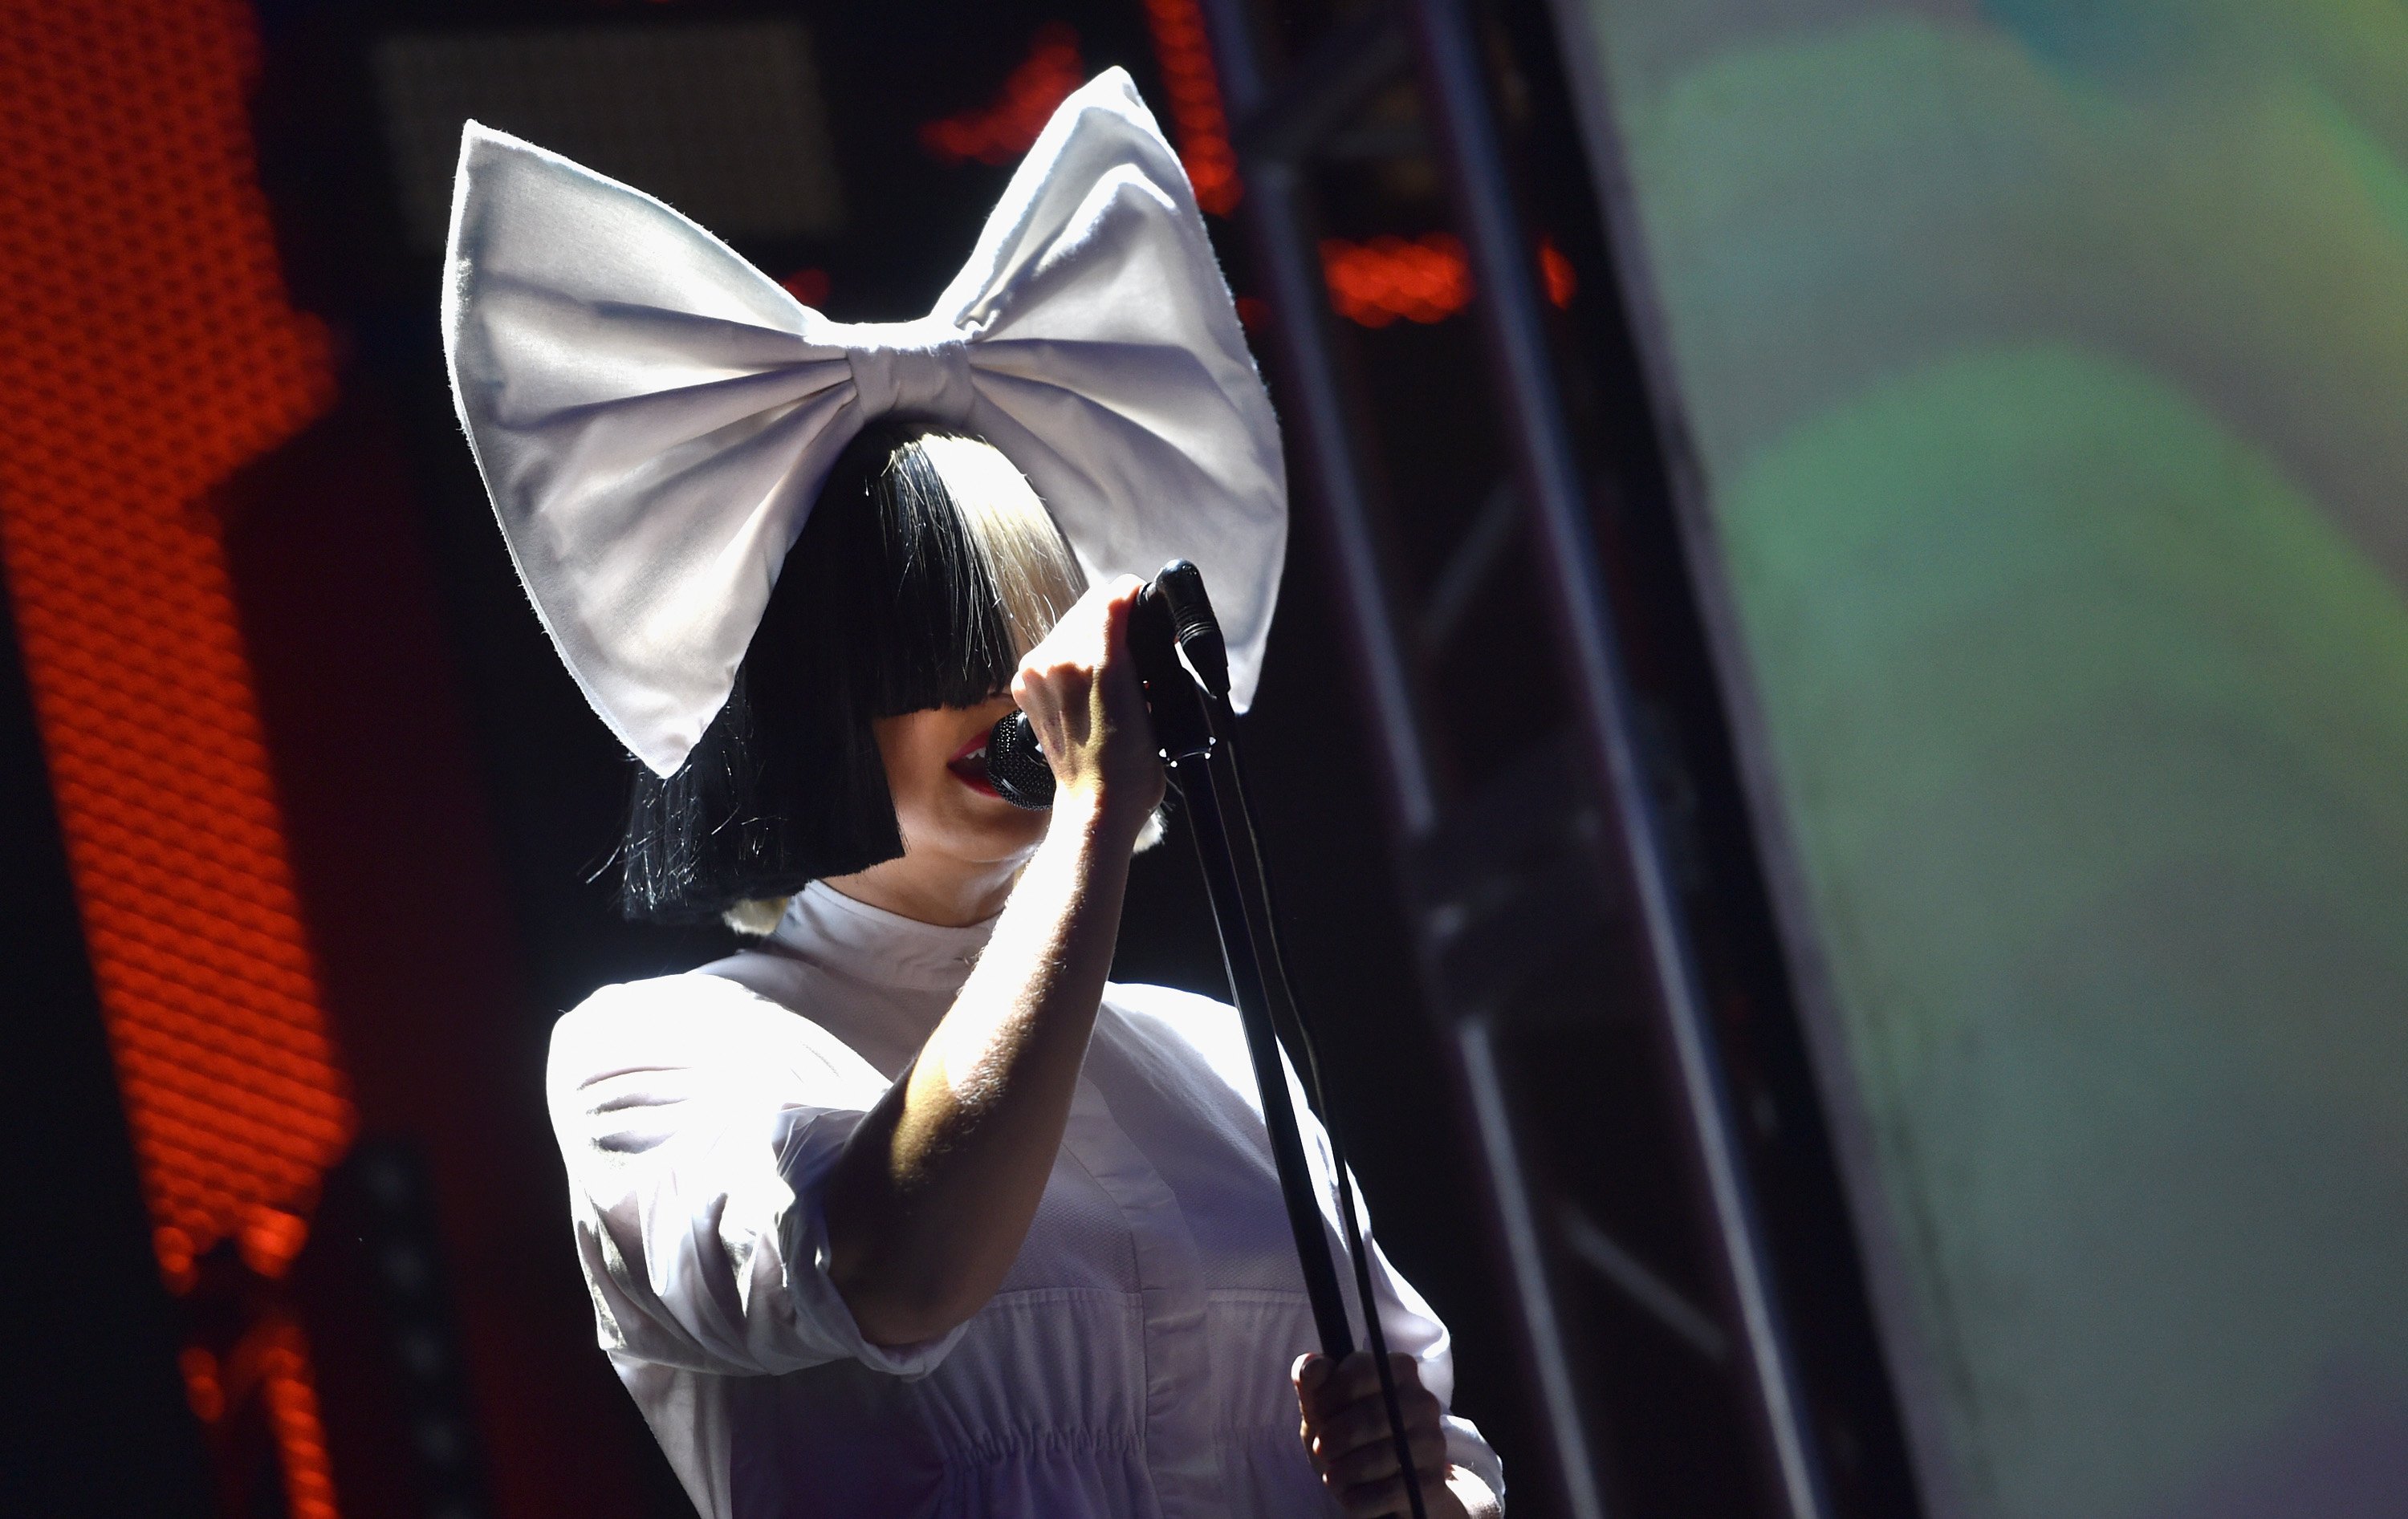 Sia performs onstage at the 2016 iHeartRadio Music Festival at T-Mobile Arena on September 23, 2016 in Las Vegas, Nevada. | Photo: Getty Images